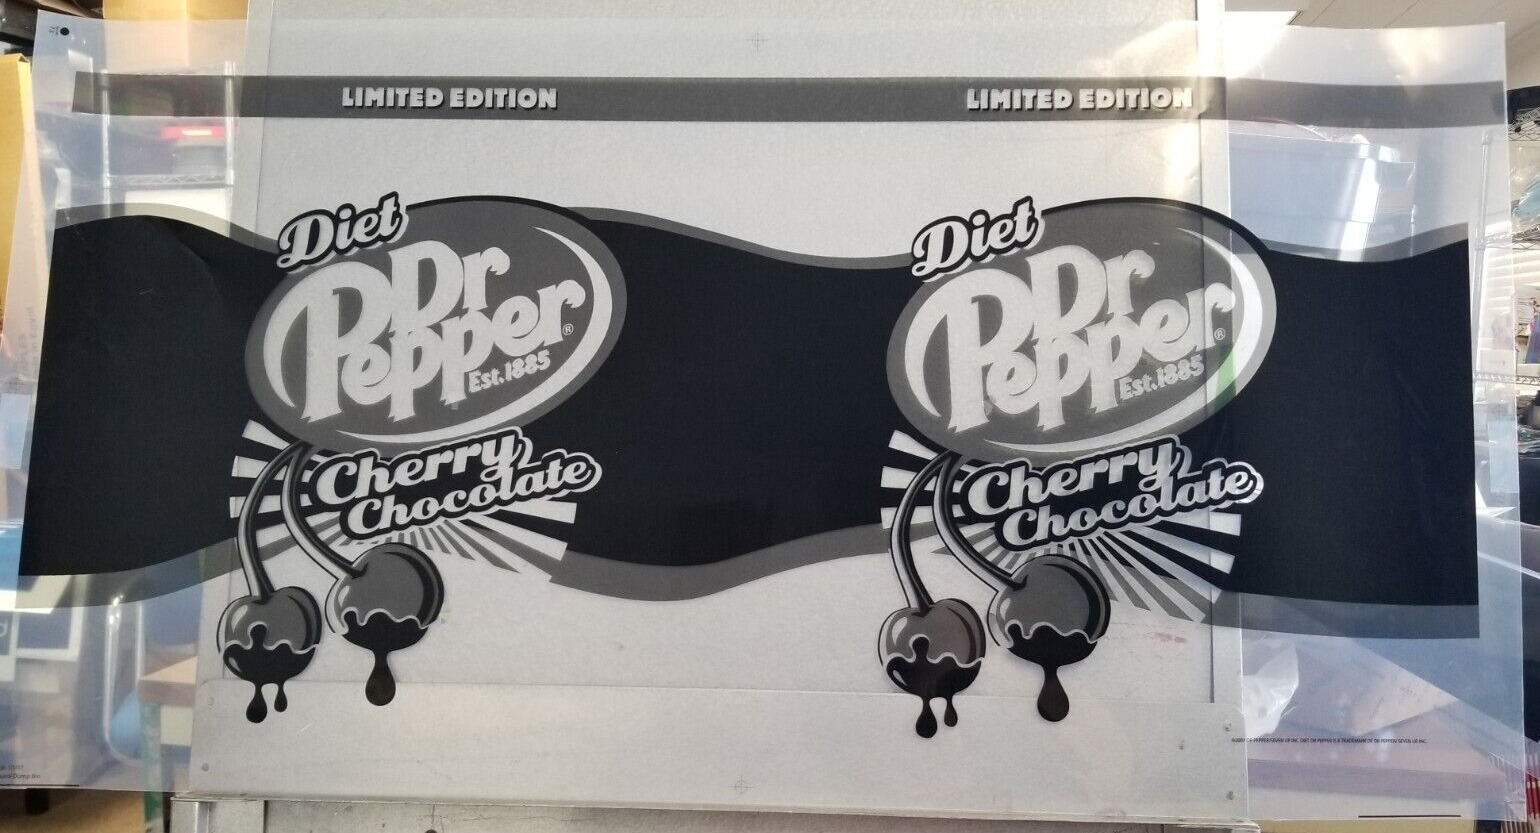 Diet Dr. Pepper Cherry Chocolate Preproduction Advertising Art Work Limited